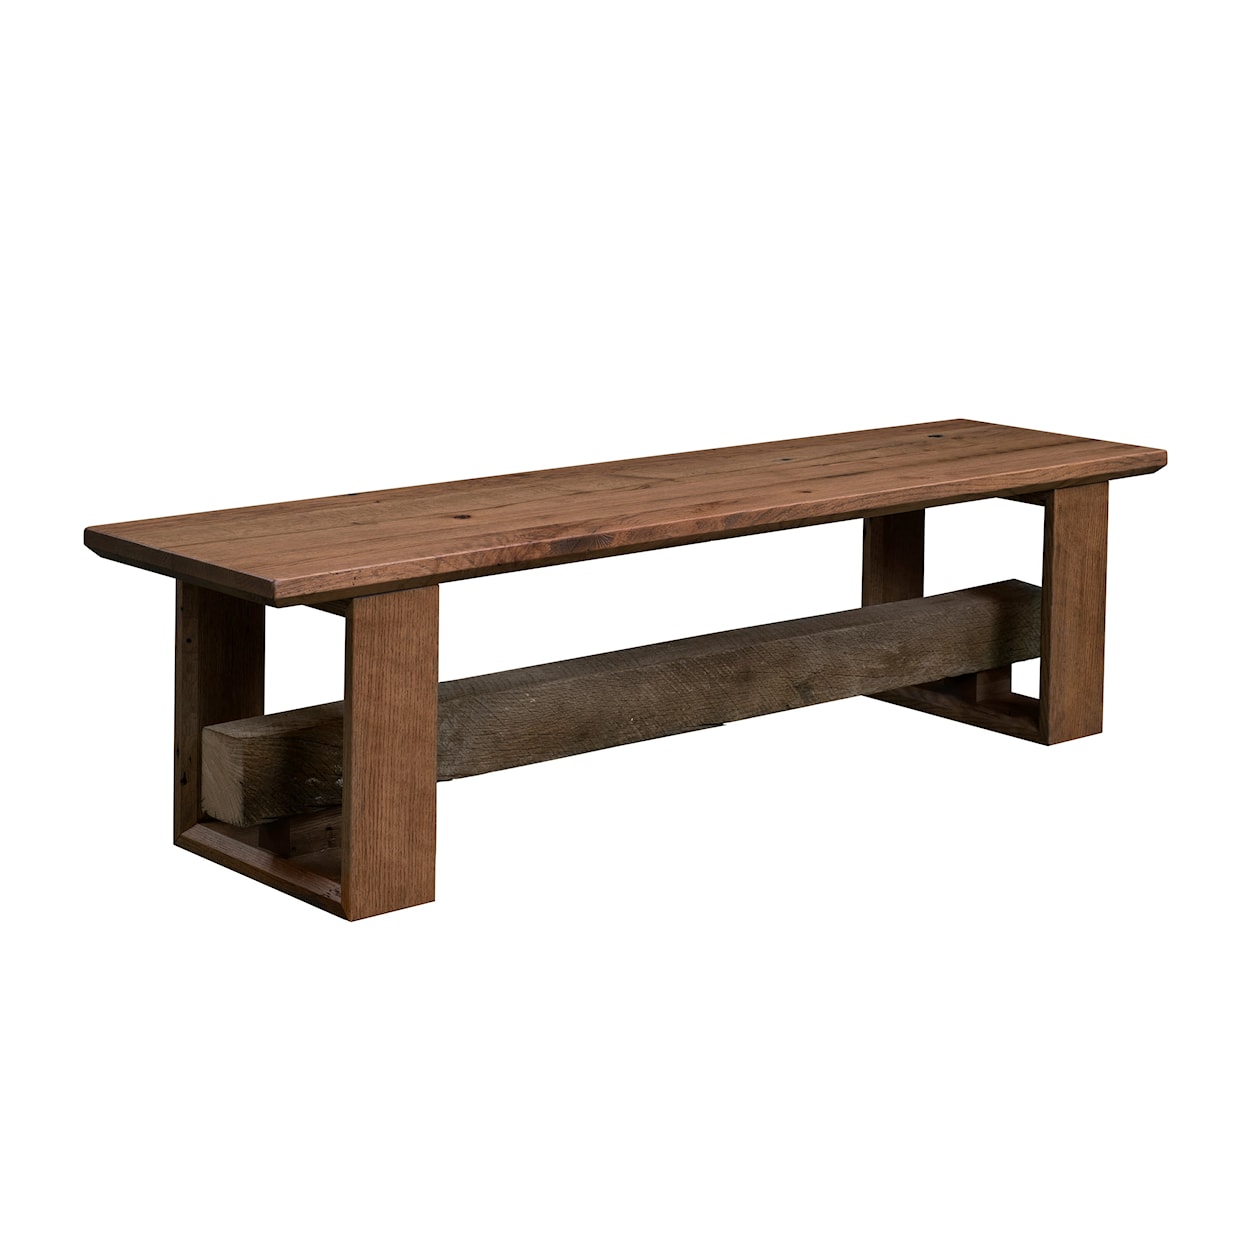 Urban Barnwood Furniture 1869 Dining 96" Accent Bench